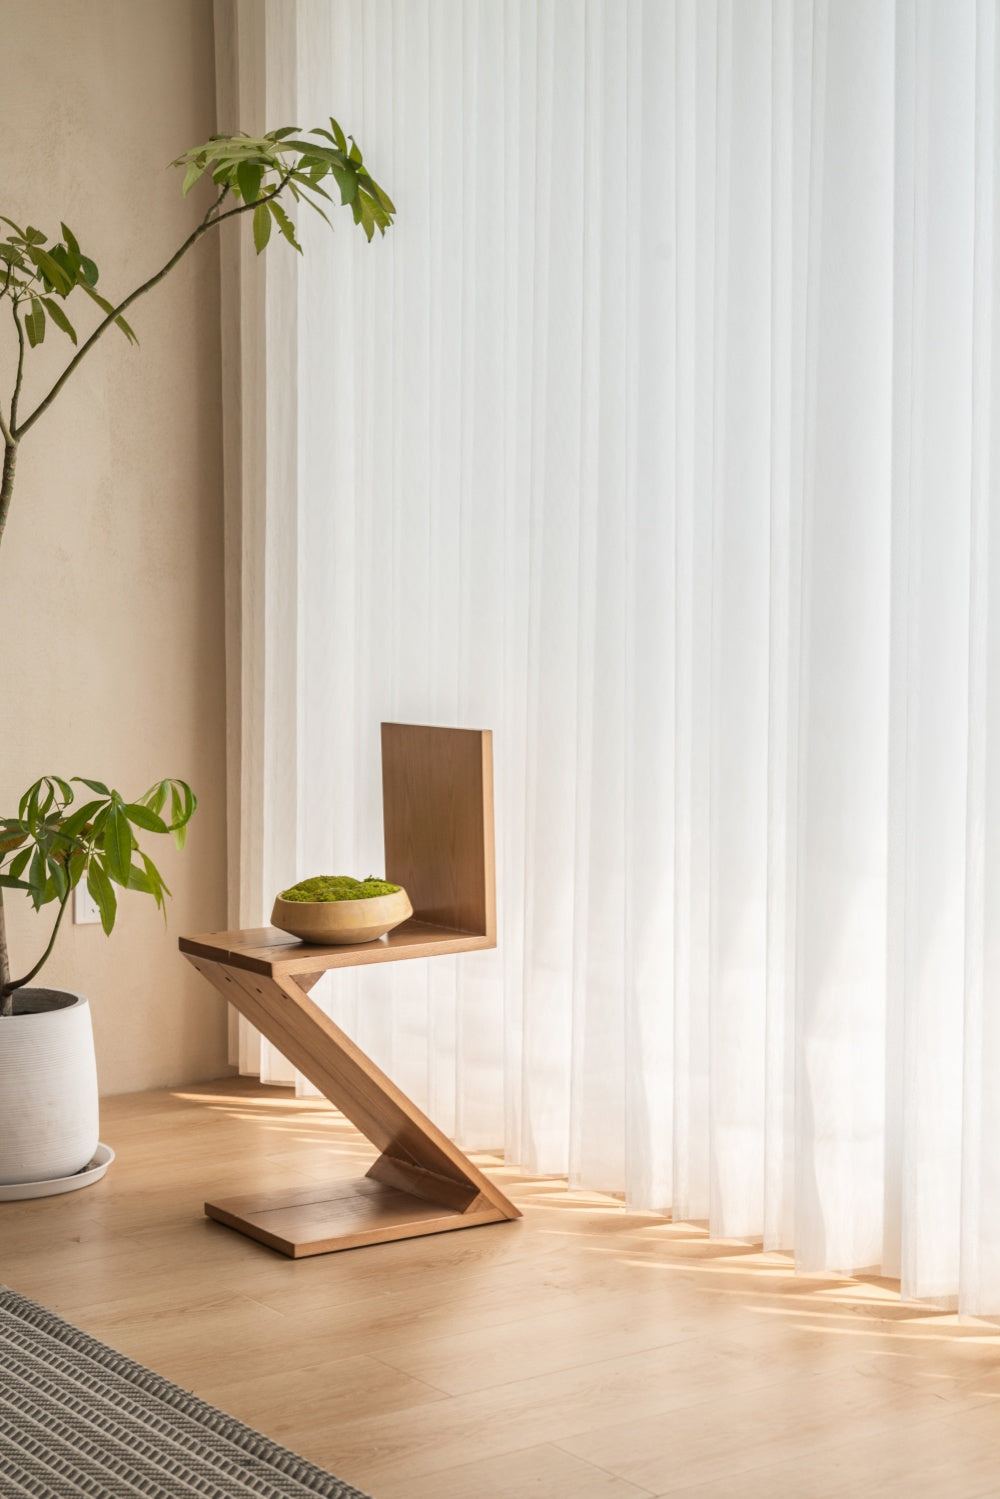  A shelf and a plant in front of a window, designed with a special fabric and sheer blend for a perfect balance of light and transparency.